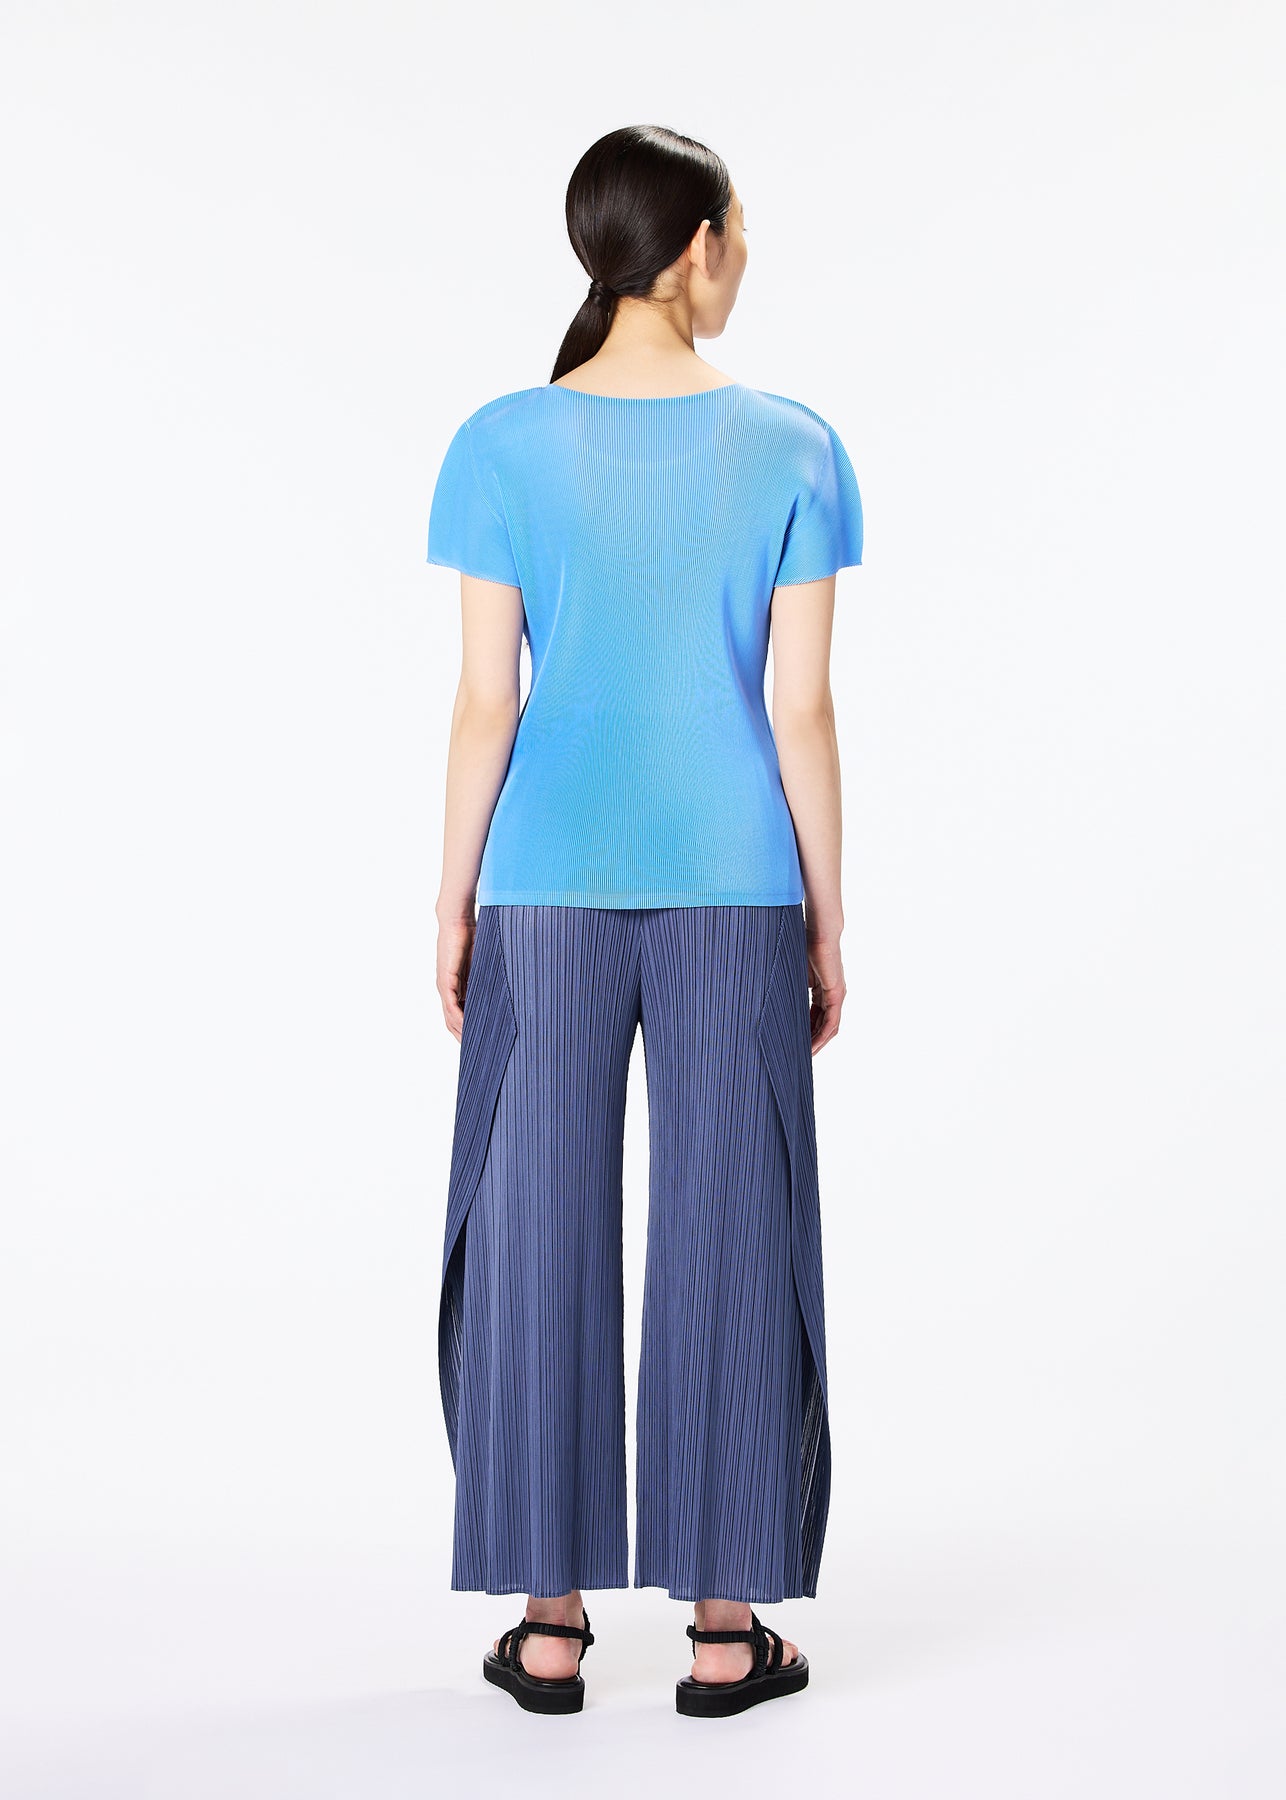 MIST JUNE TOP | The official ISSEY MIYAKE ONLINE STORE | ISSEY